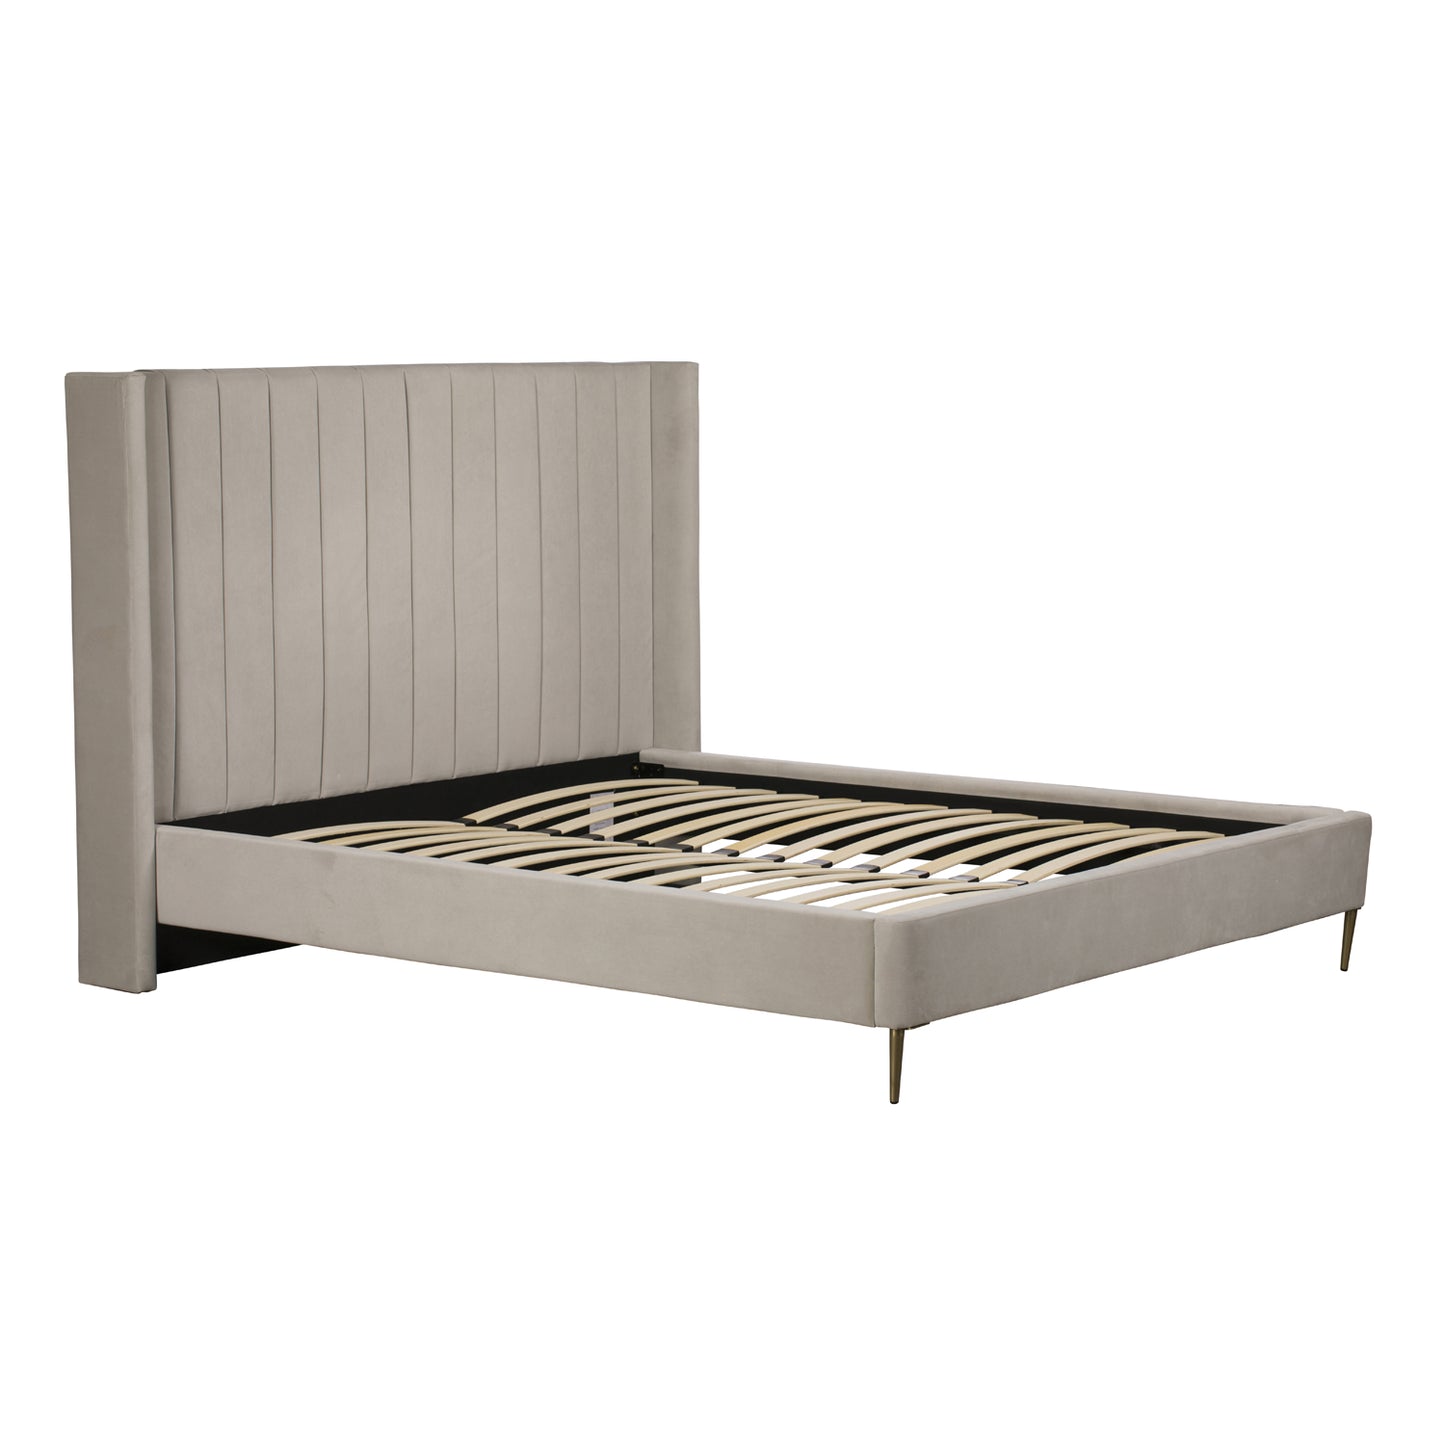 Maddox Highback Upholstered Bed - 6ft Silver